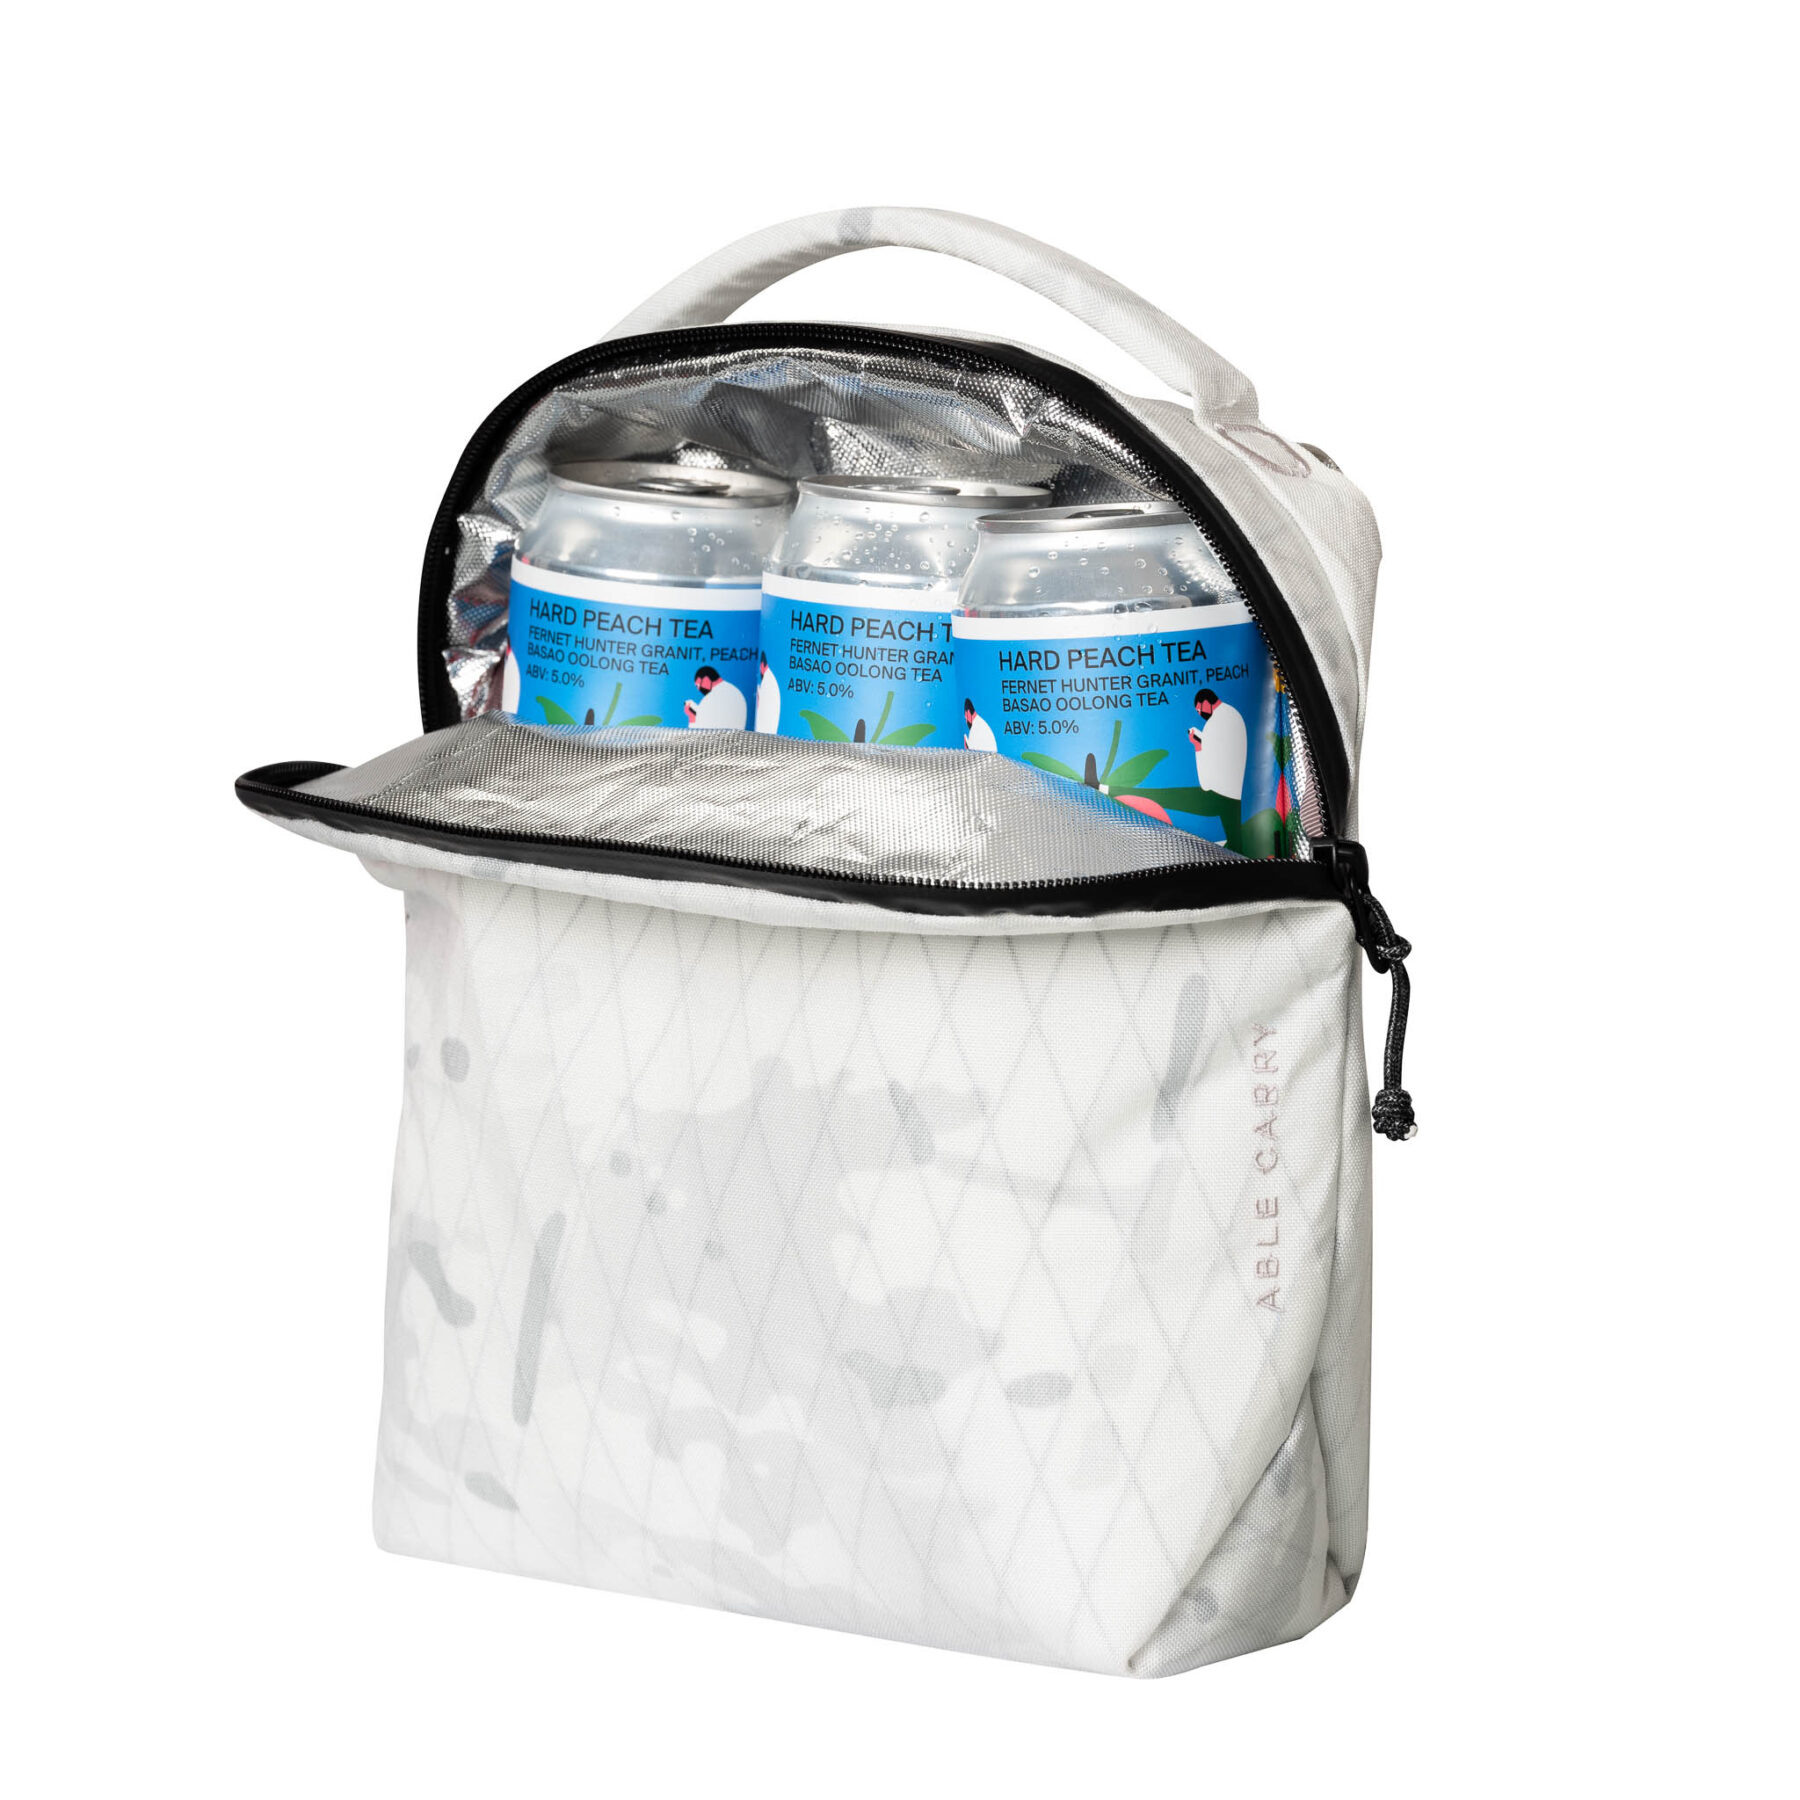 Able Cooler Bag